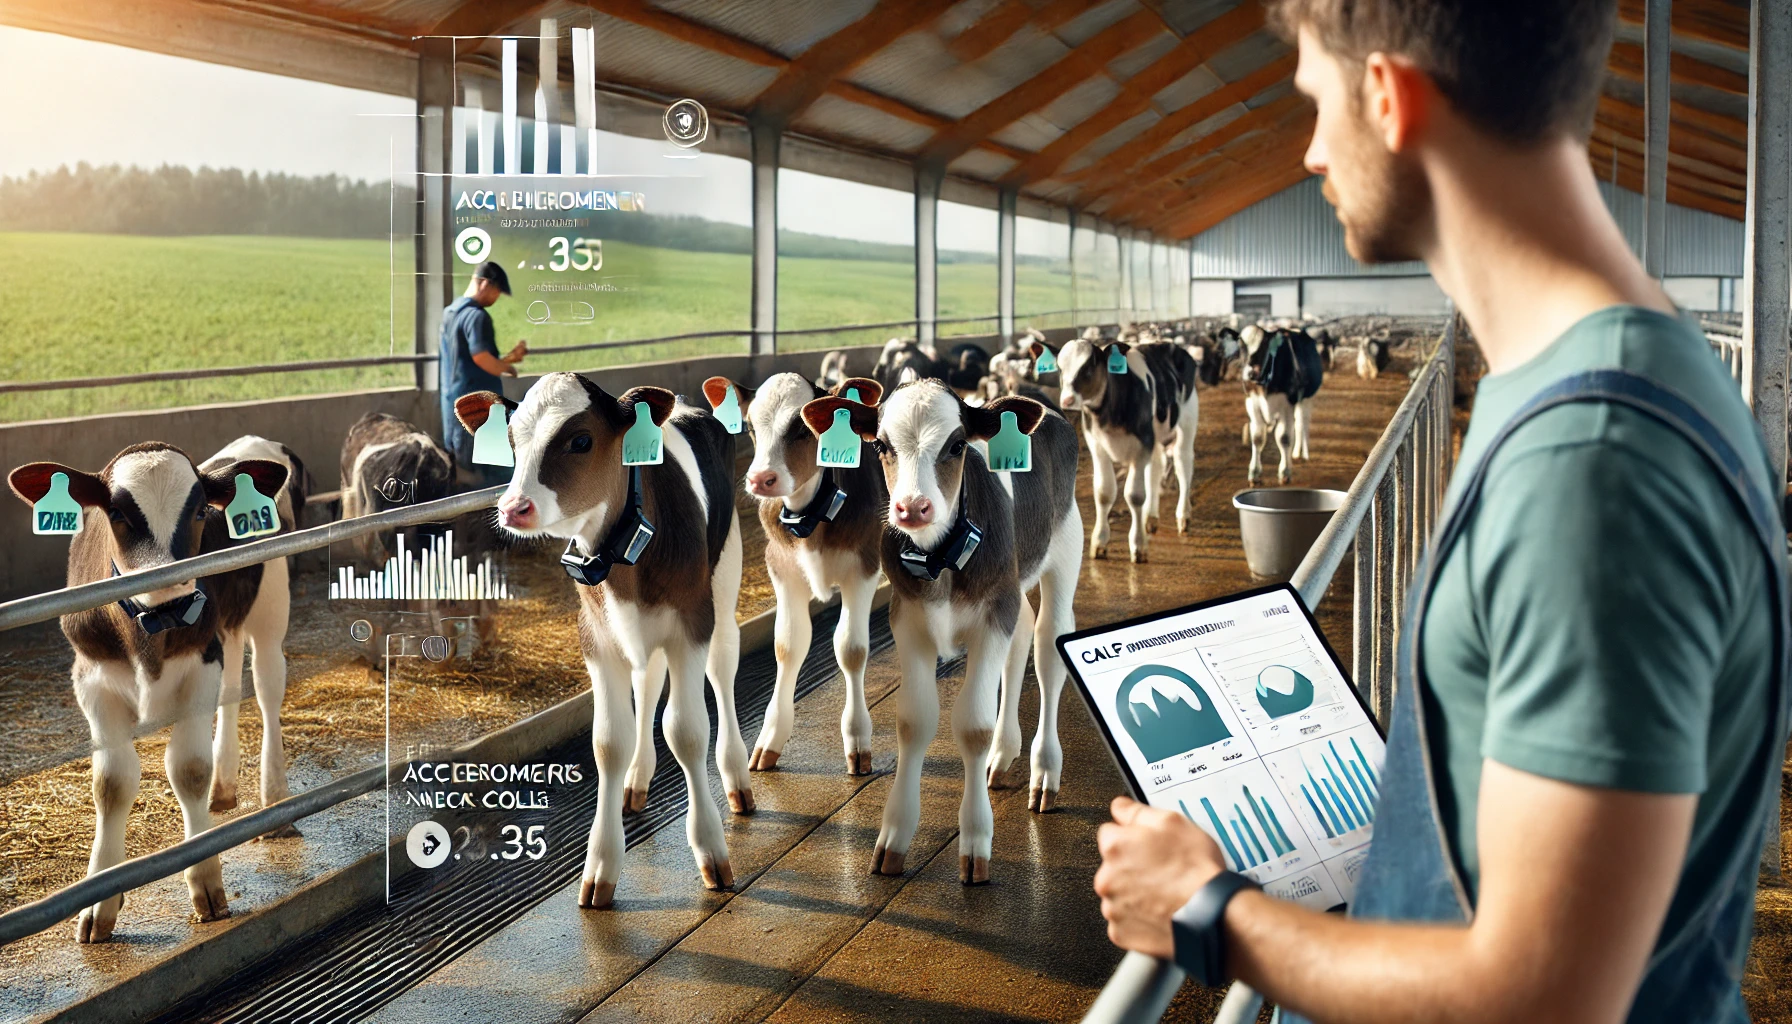 Innovative Monitoring System Improves Calf Welfare and Farm Productivity Through Real-Time Data